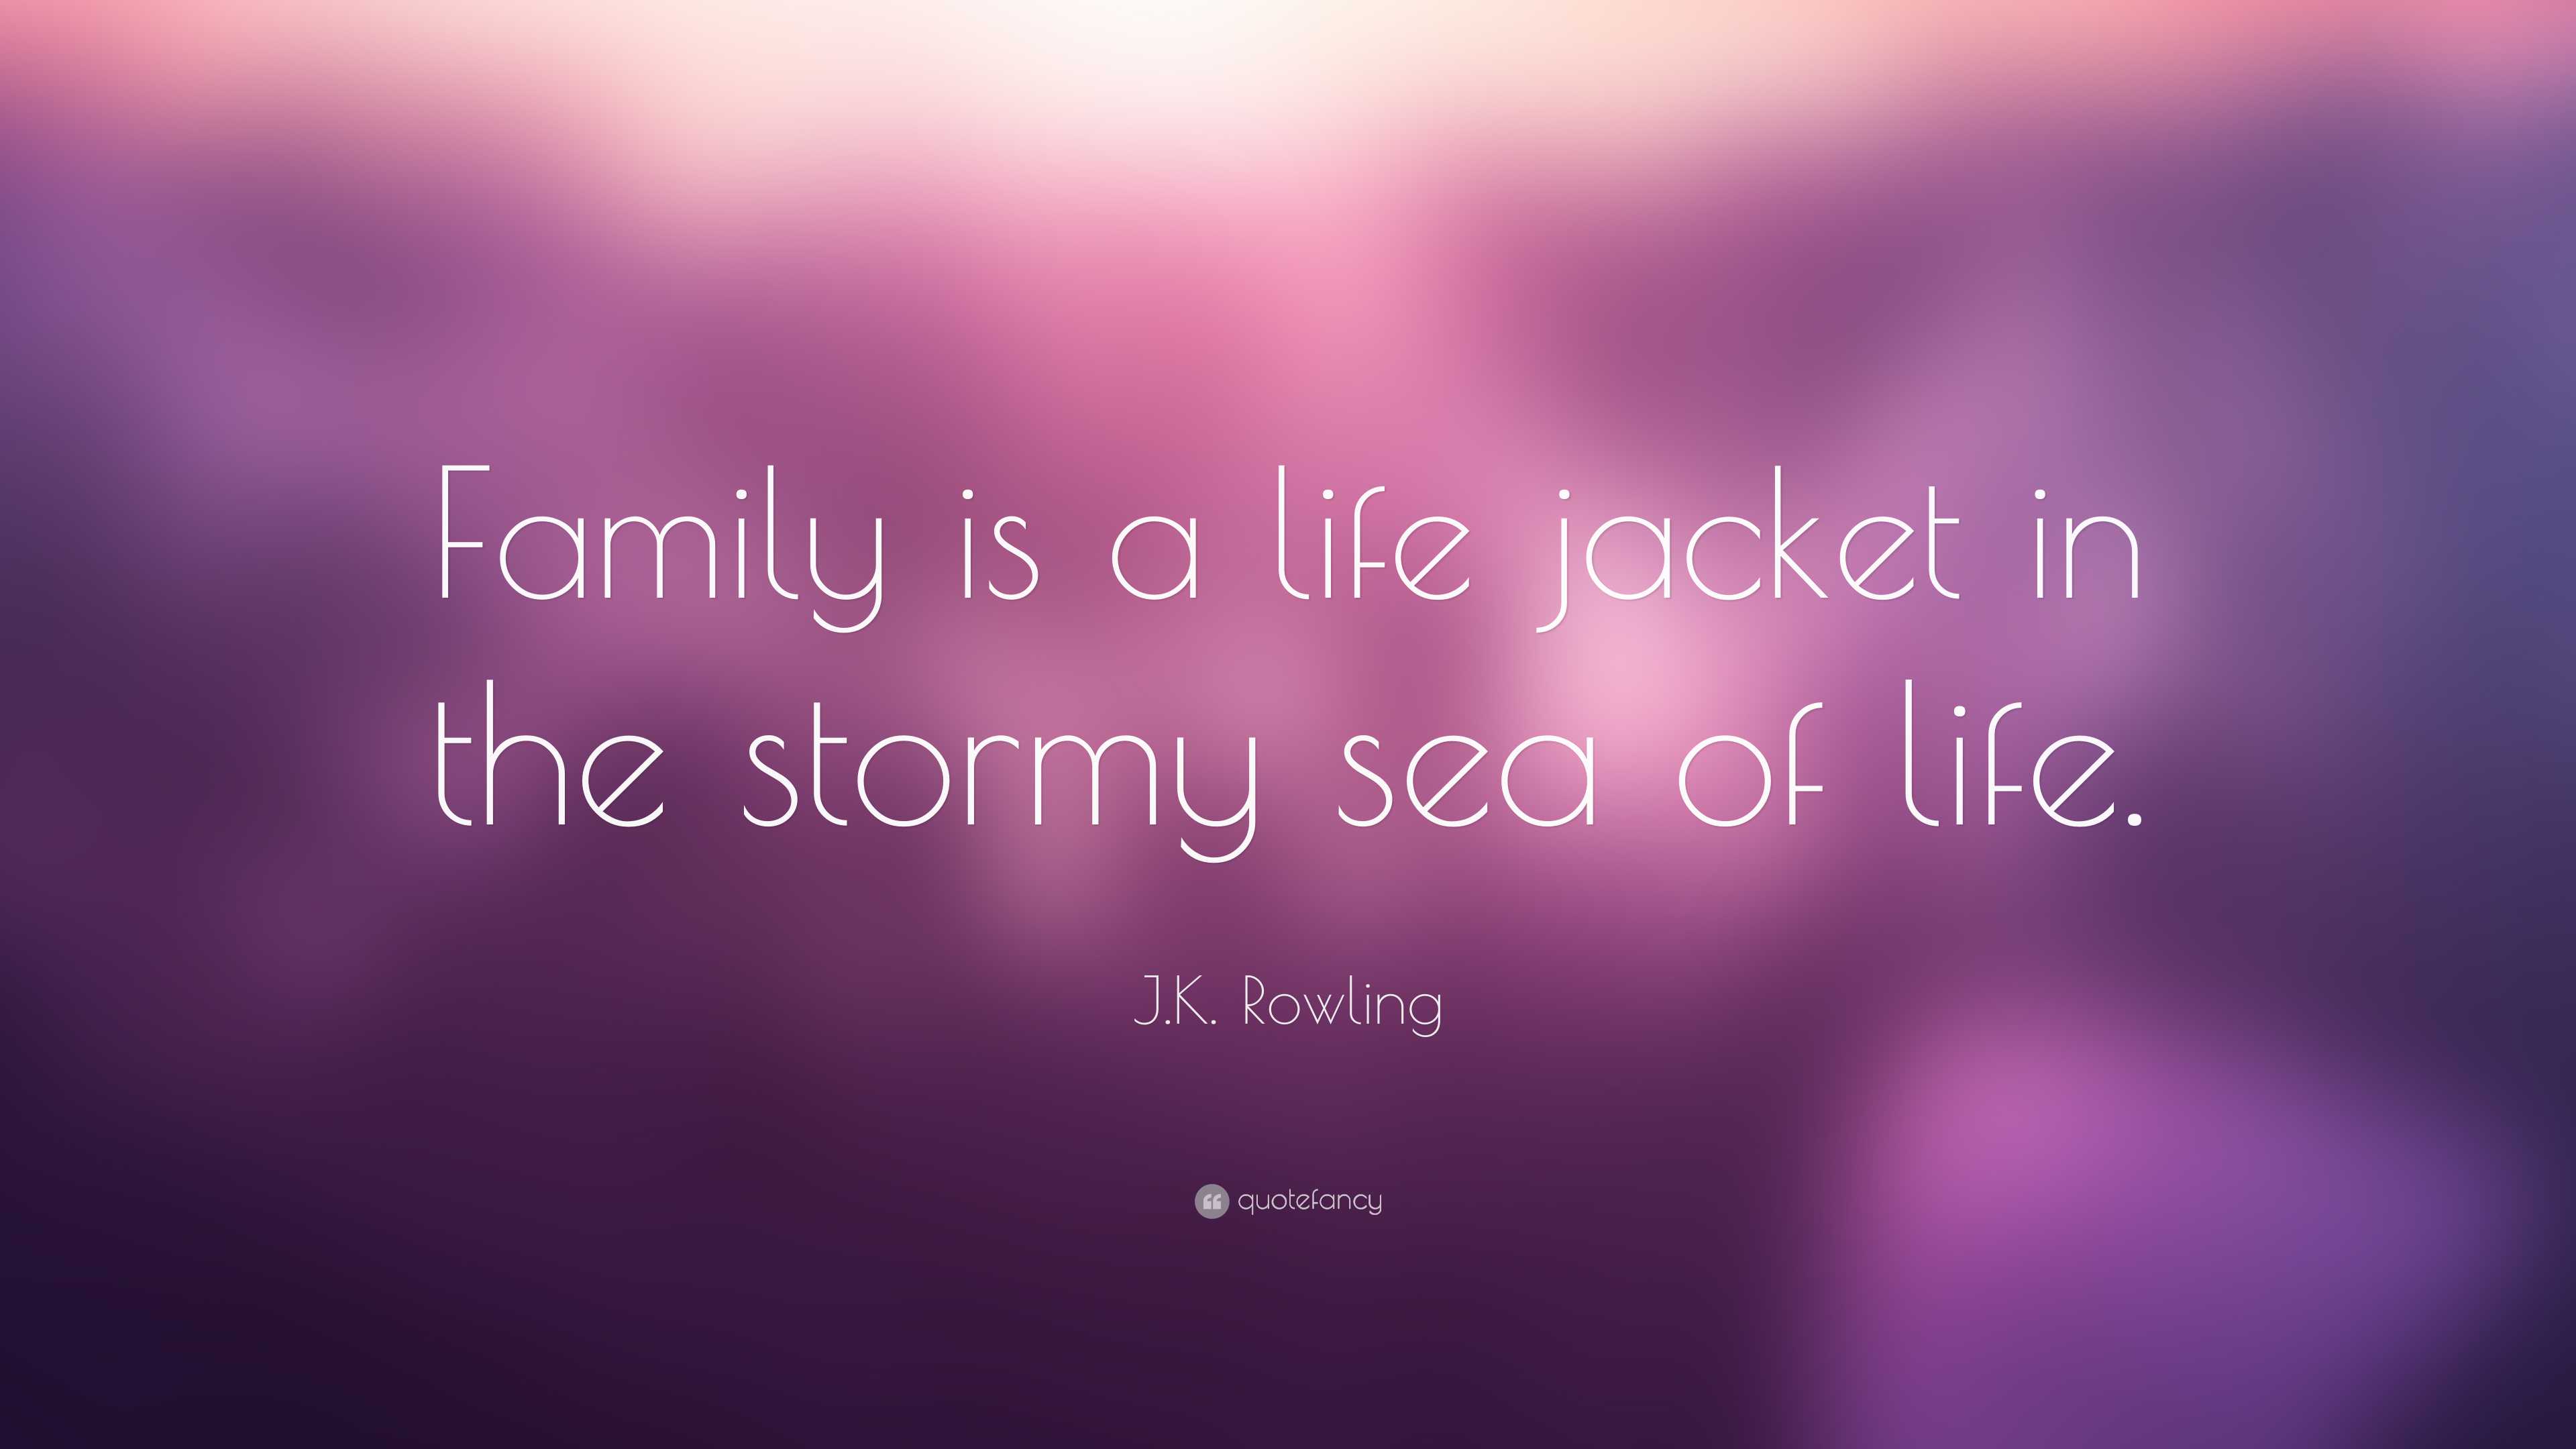 J.K. Rowling Quote: “Family is a life jacket in the stormy sea of life.”